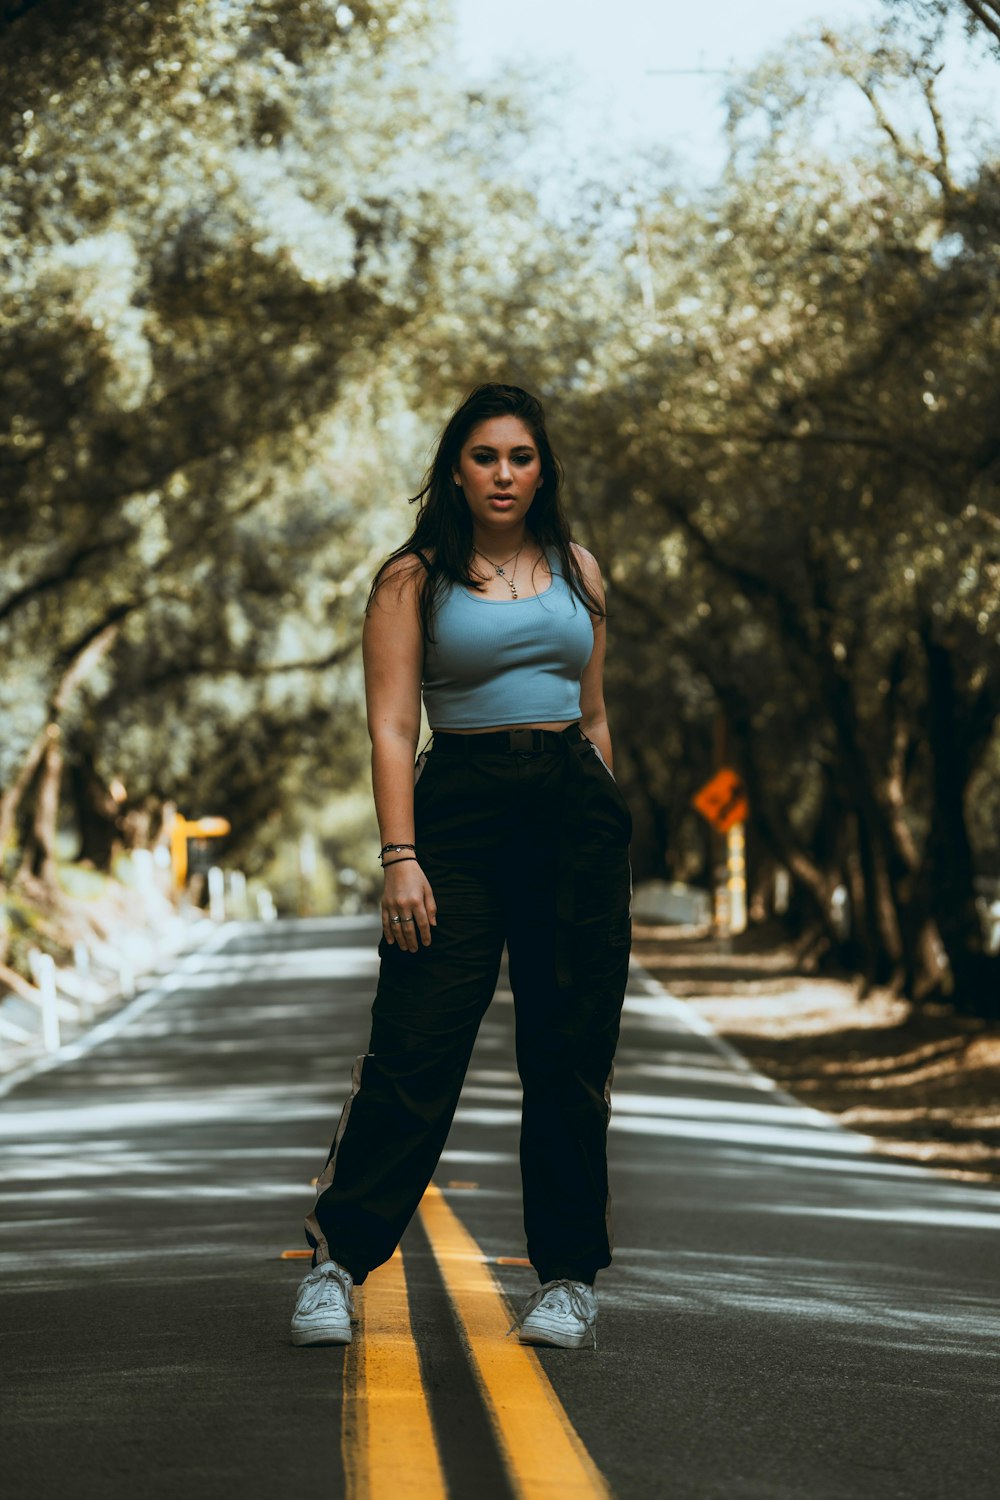 woman in white tank top and black pants standing on road during daytime